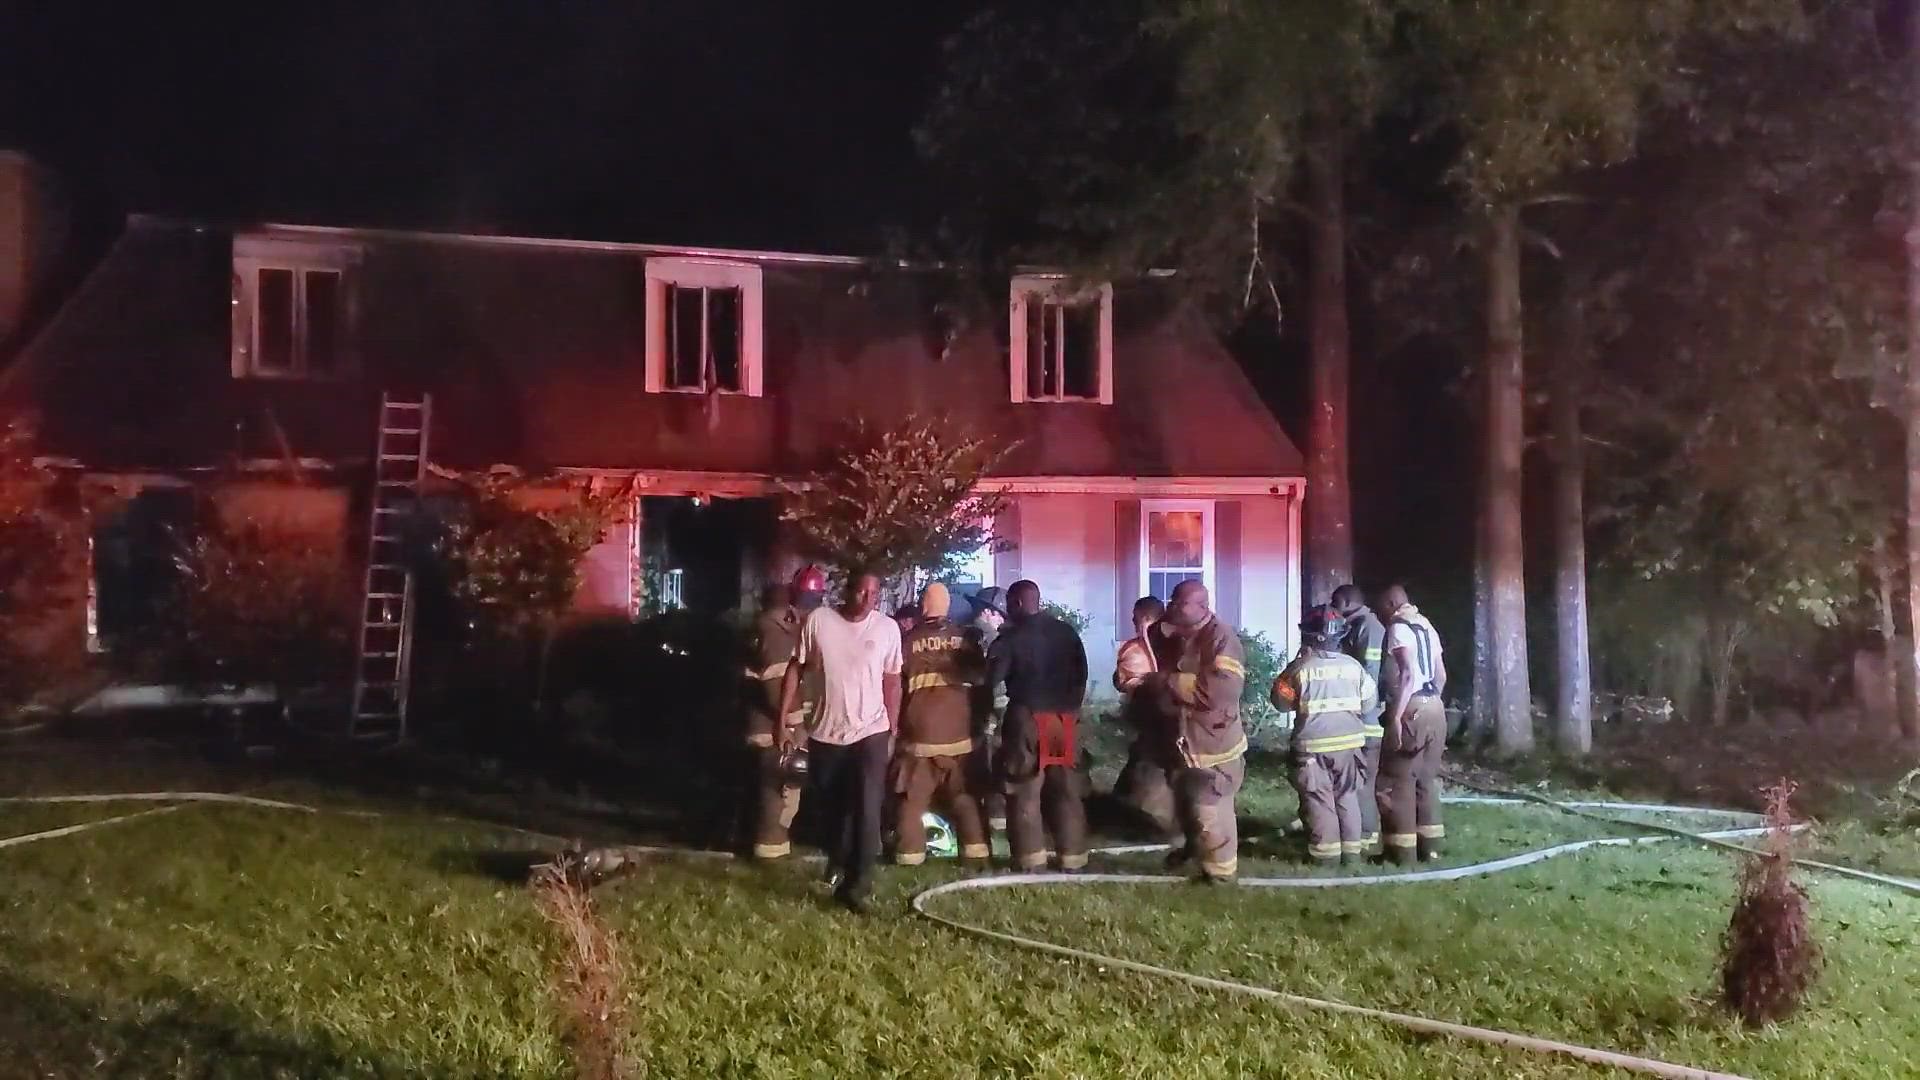 The home was empty when the fire began and no one was injured.